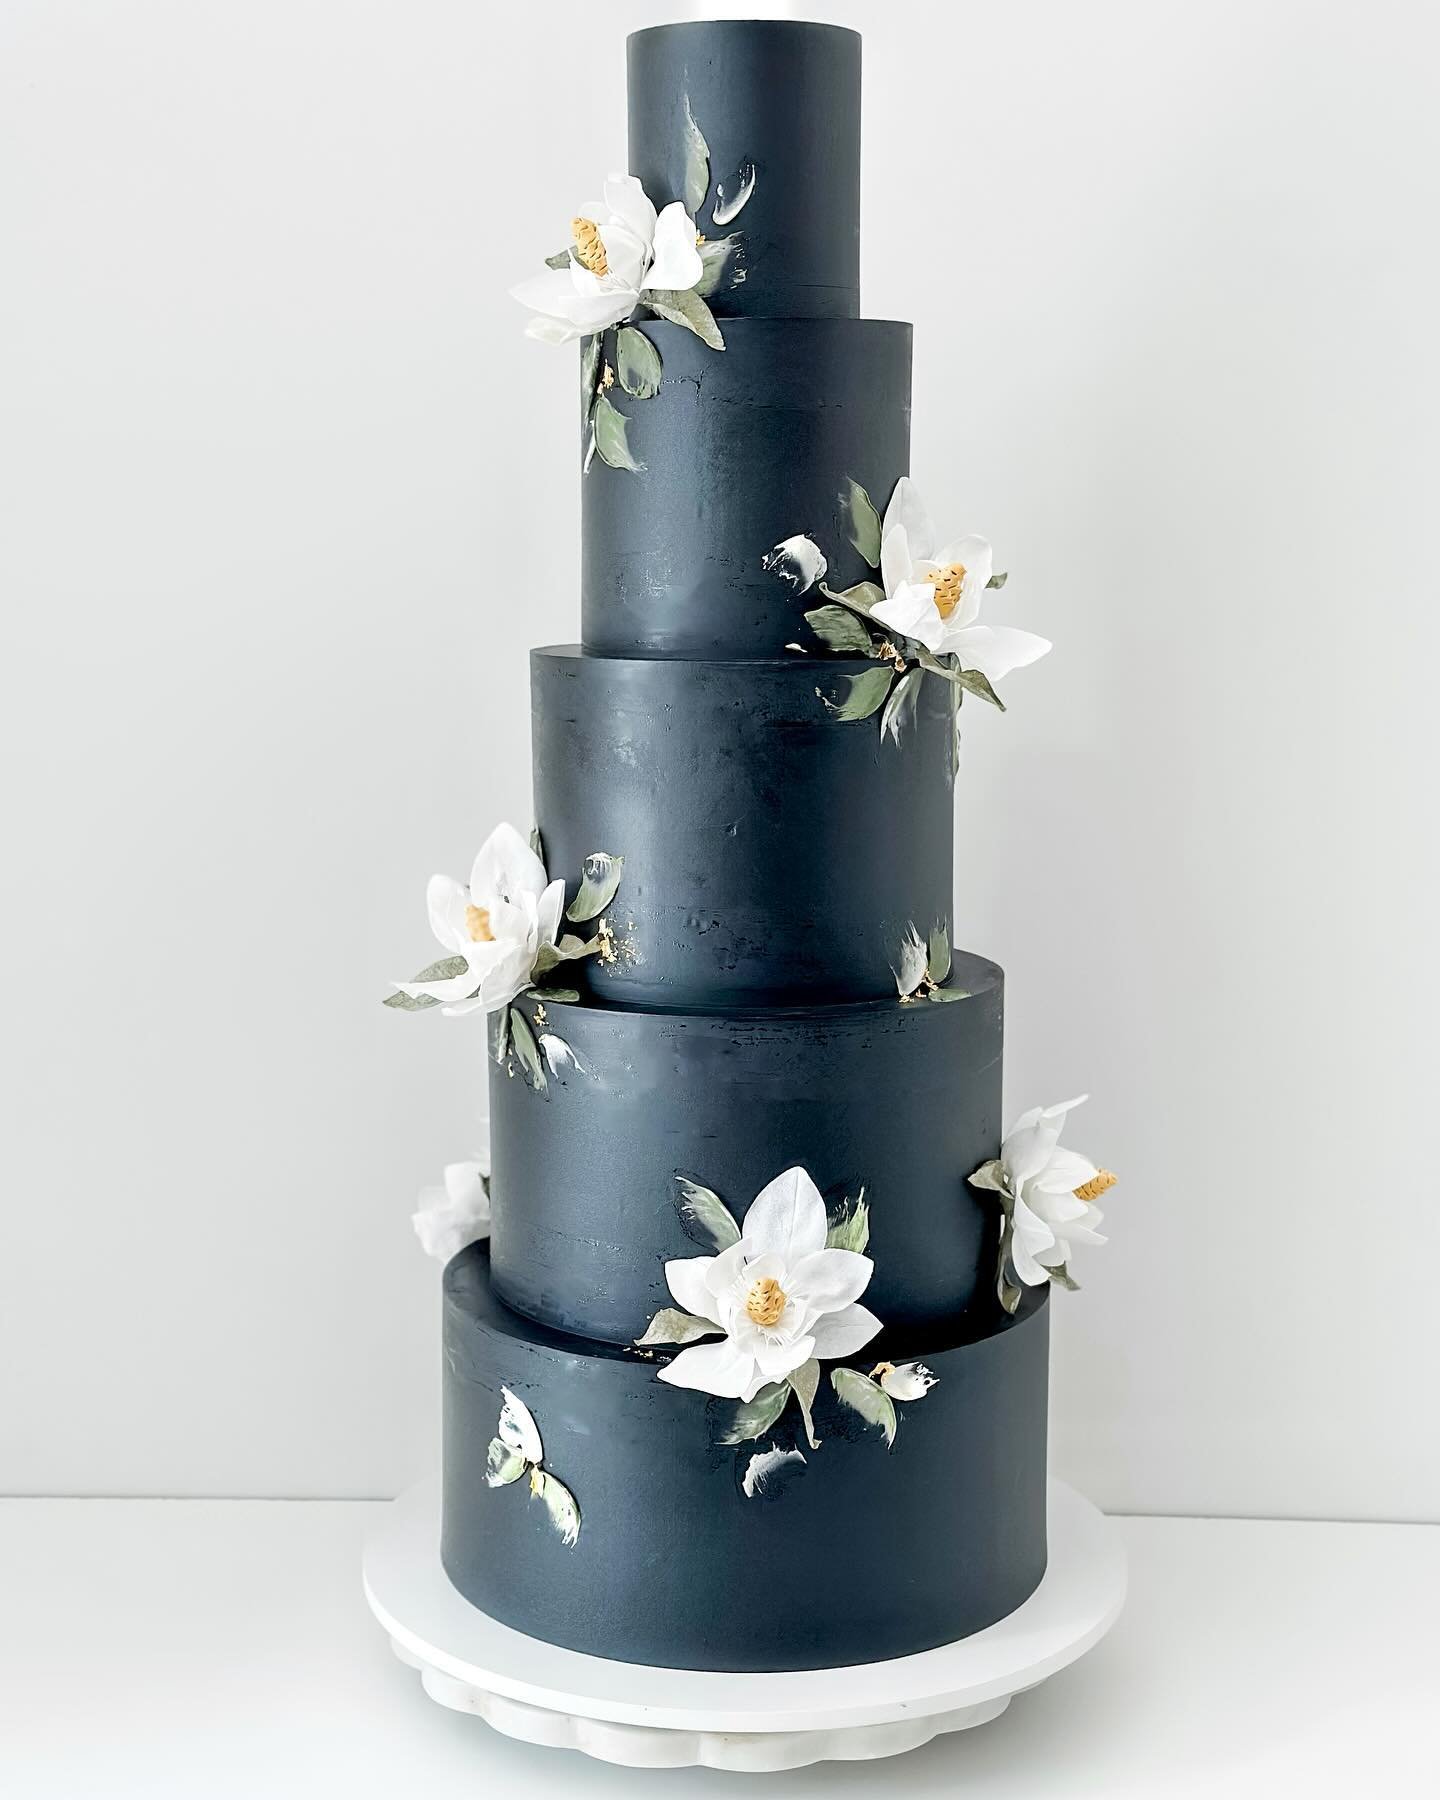 Magnolias for @sdstyleweddings launch party 🖤

Craft Flavors:
Strawberry Balsamic
Brown Butter Caramel

These magnolias were hand made out of wafer paper ✨

#sandiegowedding #sandiegoweddingcake #sdstyleweddingmagazine #weddingcake #waferpaperflower